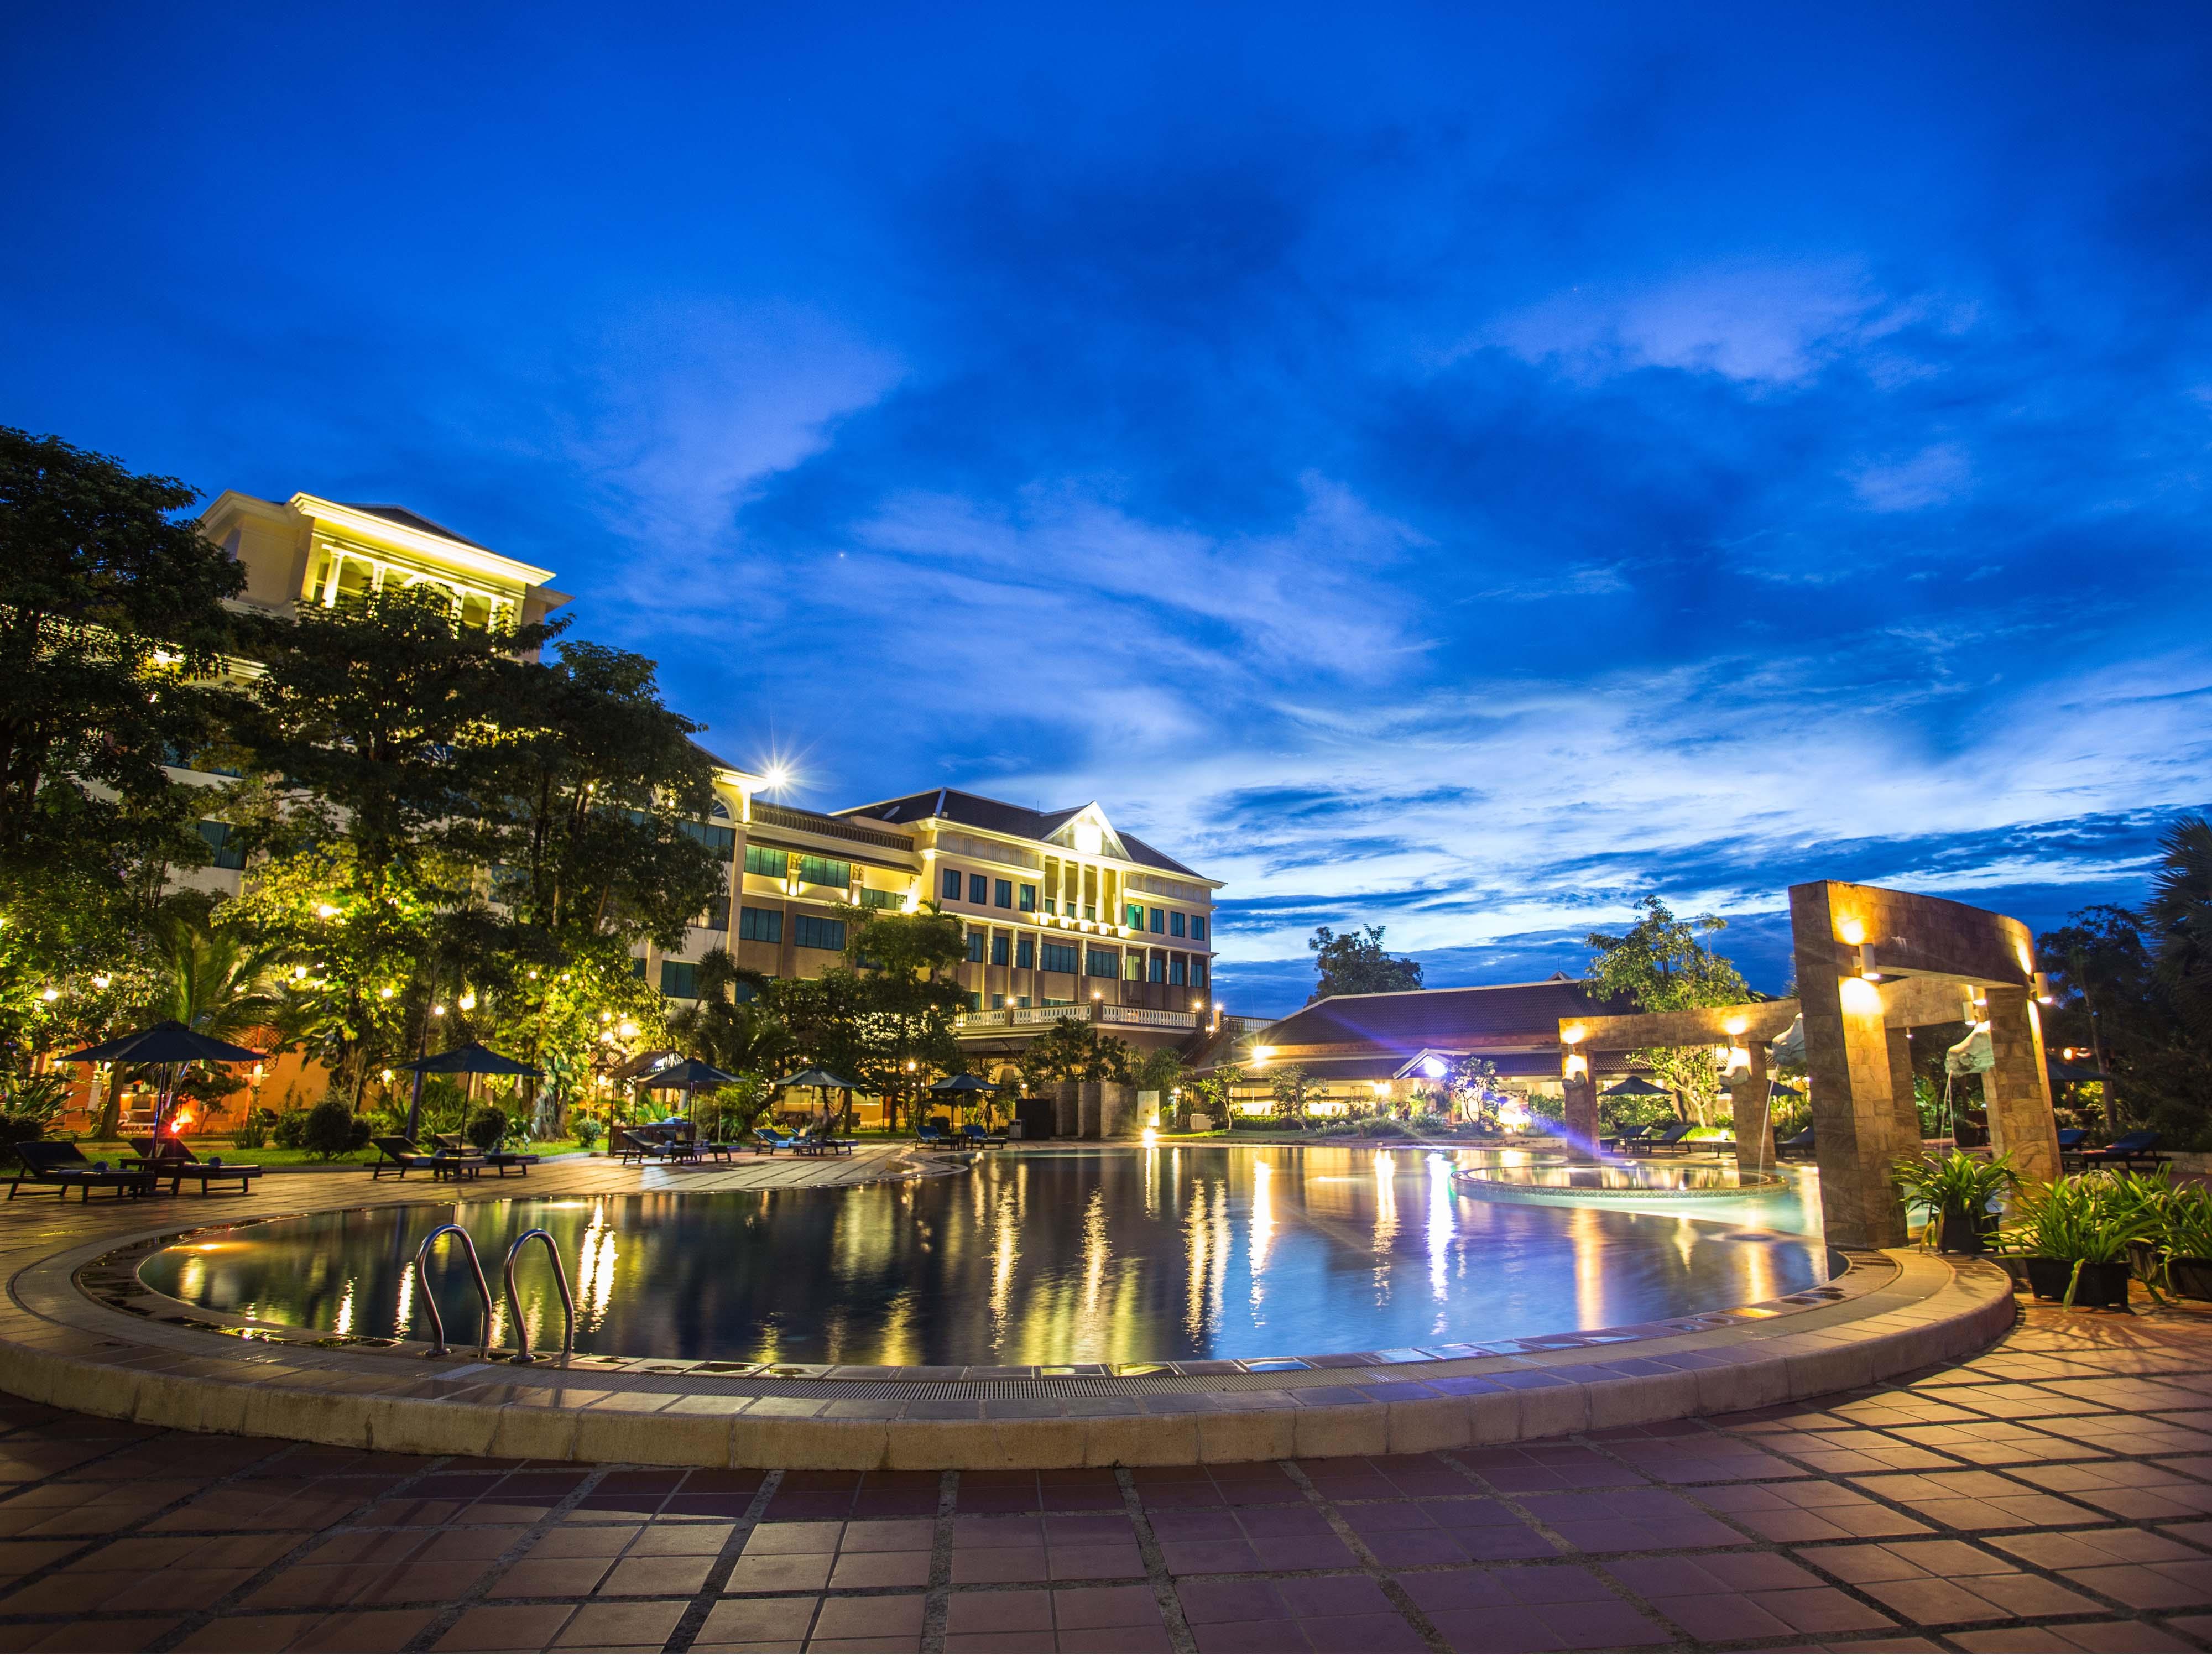 Pacific Hotel & Spa Siem Reap Province FAQ 2016, What facilities are there in Pacific Hotel & Spa Siem Reap Province 2016, What Languages Spoken are Supported in Pacific Hotel & Spa Siem Reap Province 2016, Which payment cards are accepted in Pacific Hotel & Spa Siem Reap Province , Siem Reap Province Pacific Hotel & Spa room facilities and services Q&A 2016, Siem Reap Province Pacific Hotel & Spa online booking services 2016, Siem Reap Province Pacific Hotel & Spa address 2016, Siem Reap Province Pacific Hotel & Spa telephone number 2016,Siem Reap Province Pacific Hotel & Spa map 2016, Siem Reap Province Pacific Hotel & Spa traffic guide 2016, how to go Siem Reap Province Pacific Hotel & Spa, Siem Reap Province Pacific Hotel & Spa booking online 2016, Siem Reap Province Pacific Hotel & Spa room types 2016.